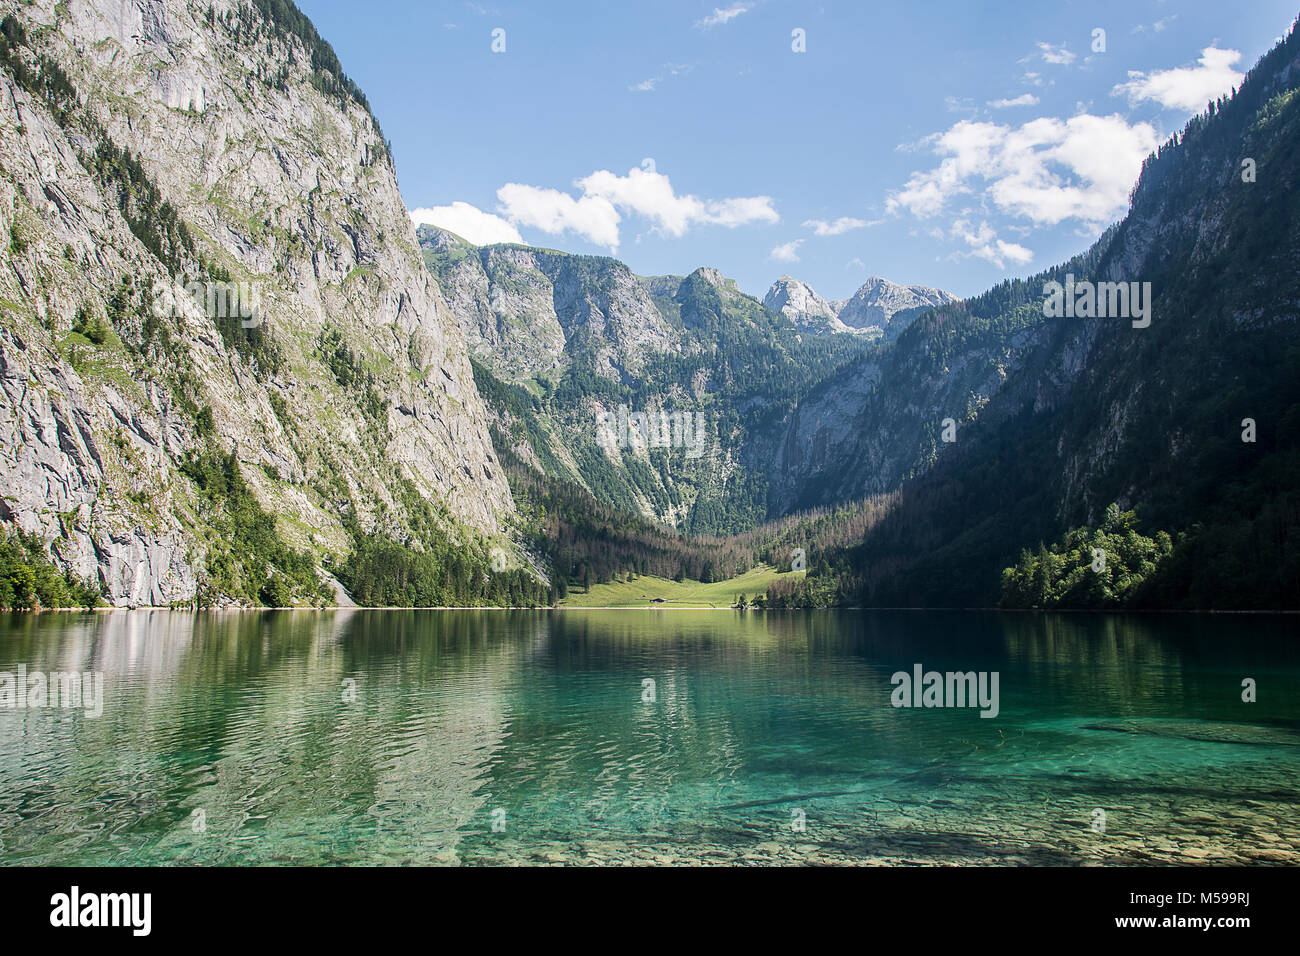 Lake and mountains in Germany, Königsee Stock Photo